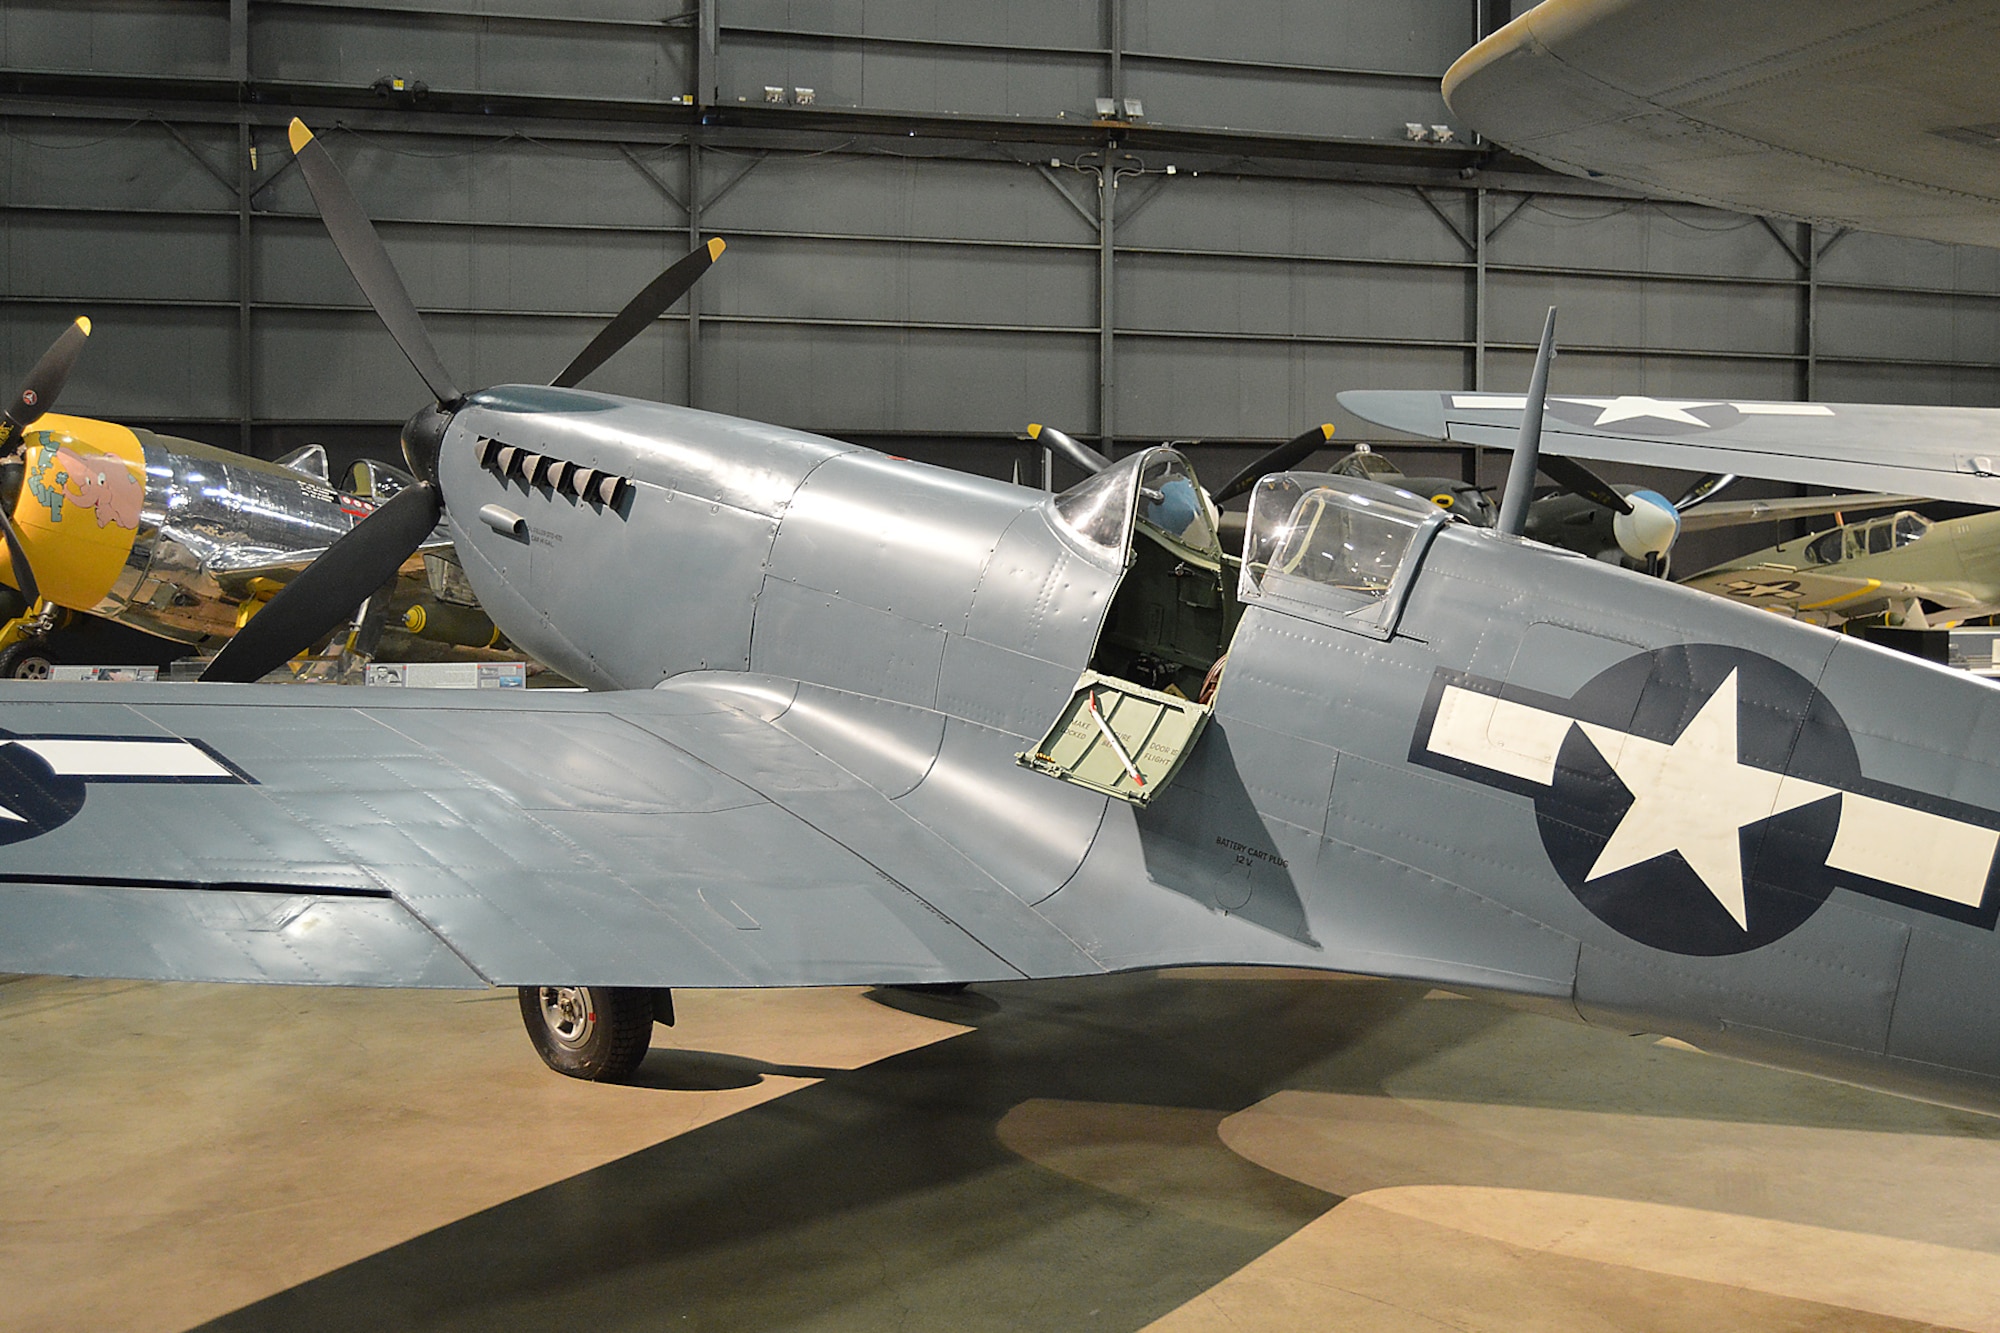 DAYTON, Ohio -- Supermarine Spitfire Mk XI in the World War II Gallery at the National Museum of the United States Air Force. (U.S. Air Force photo)
